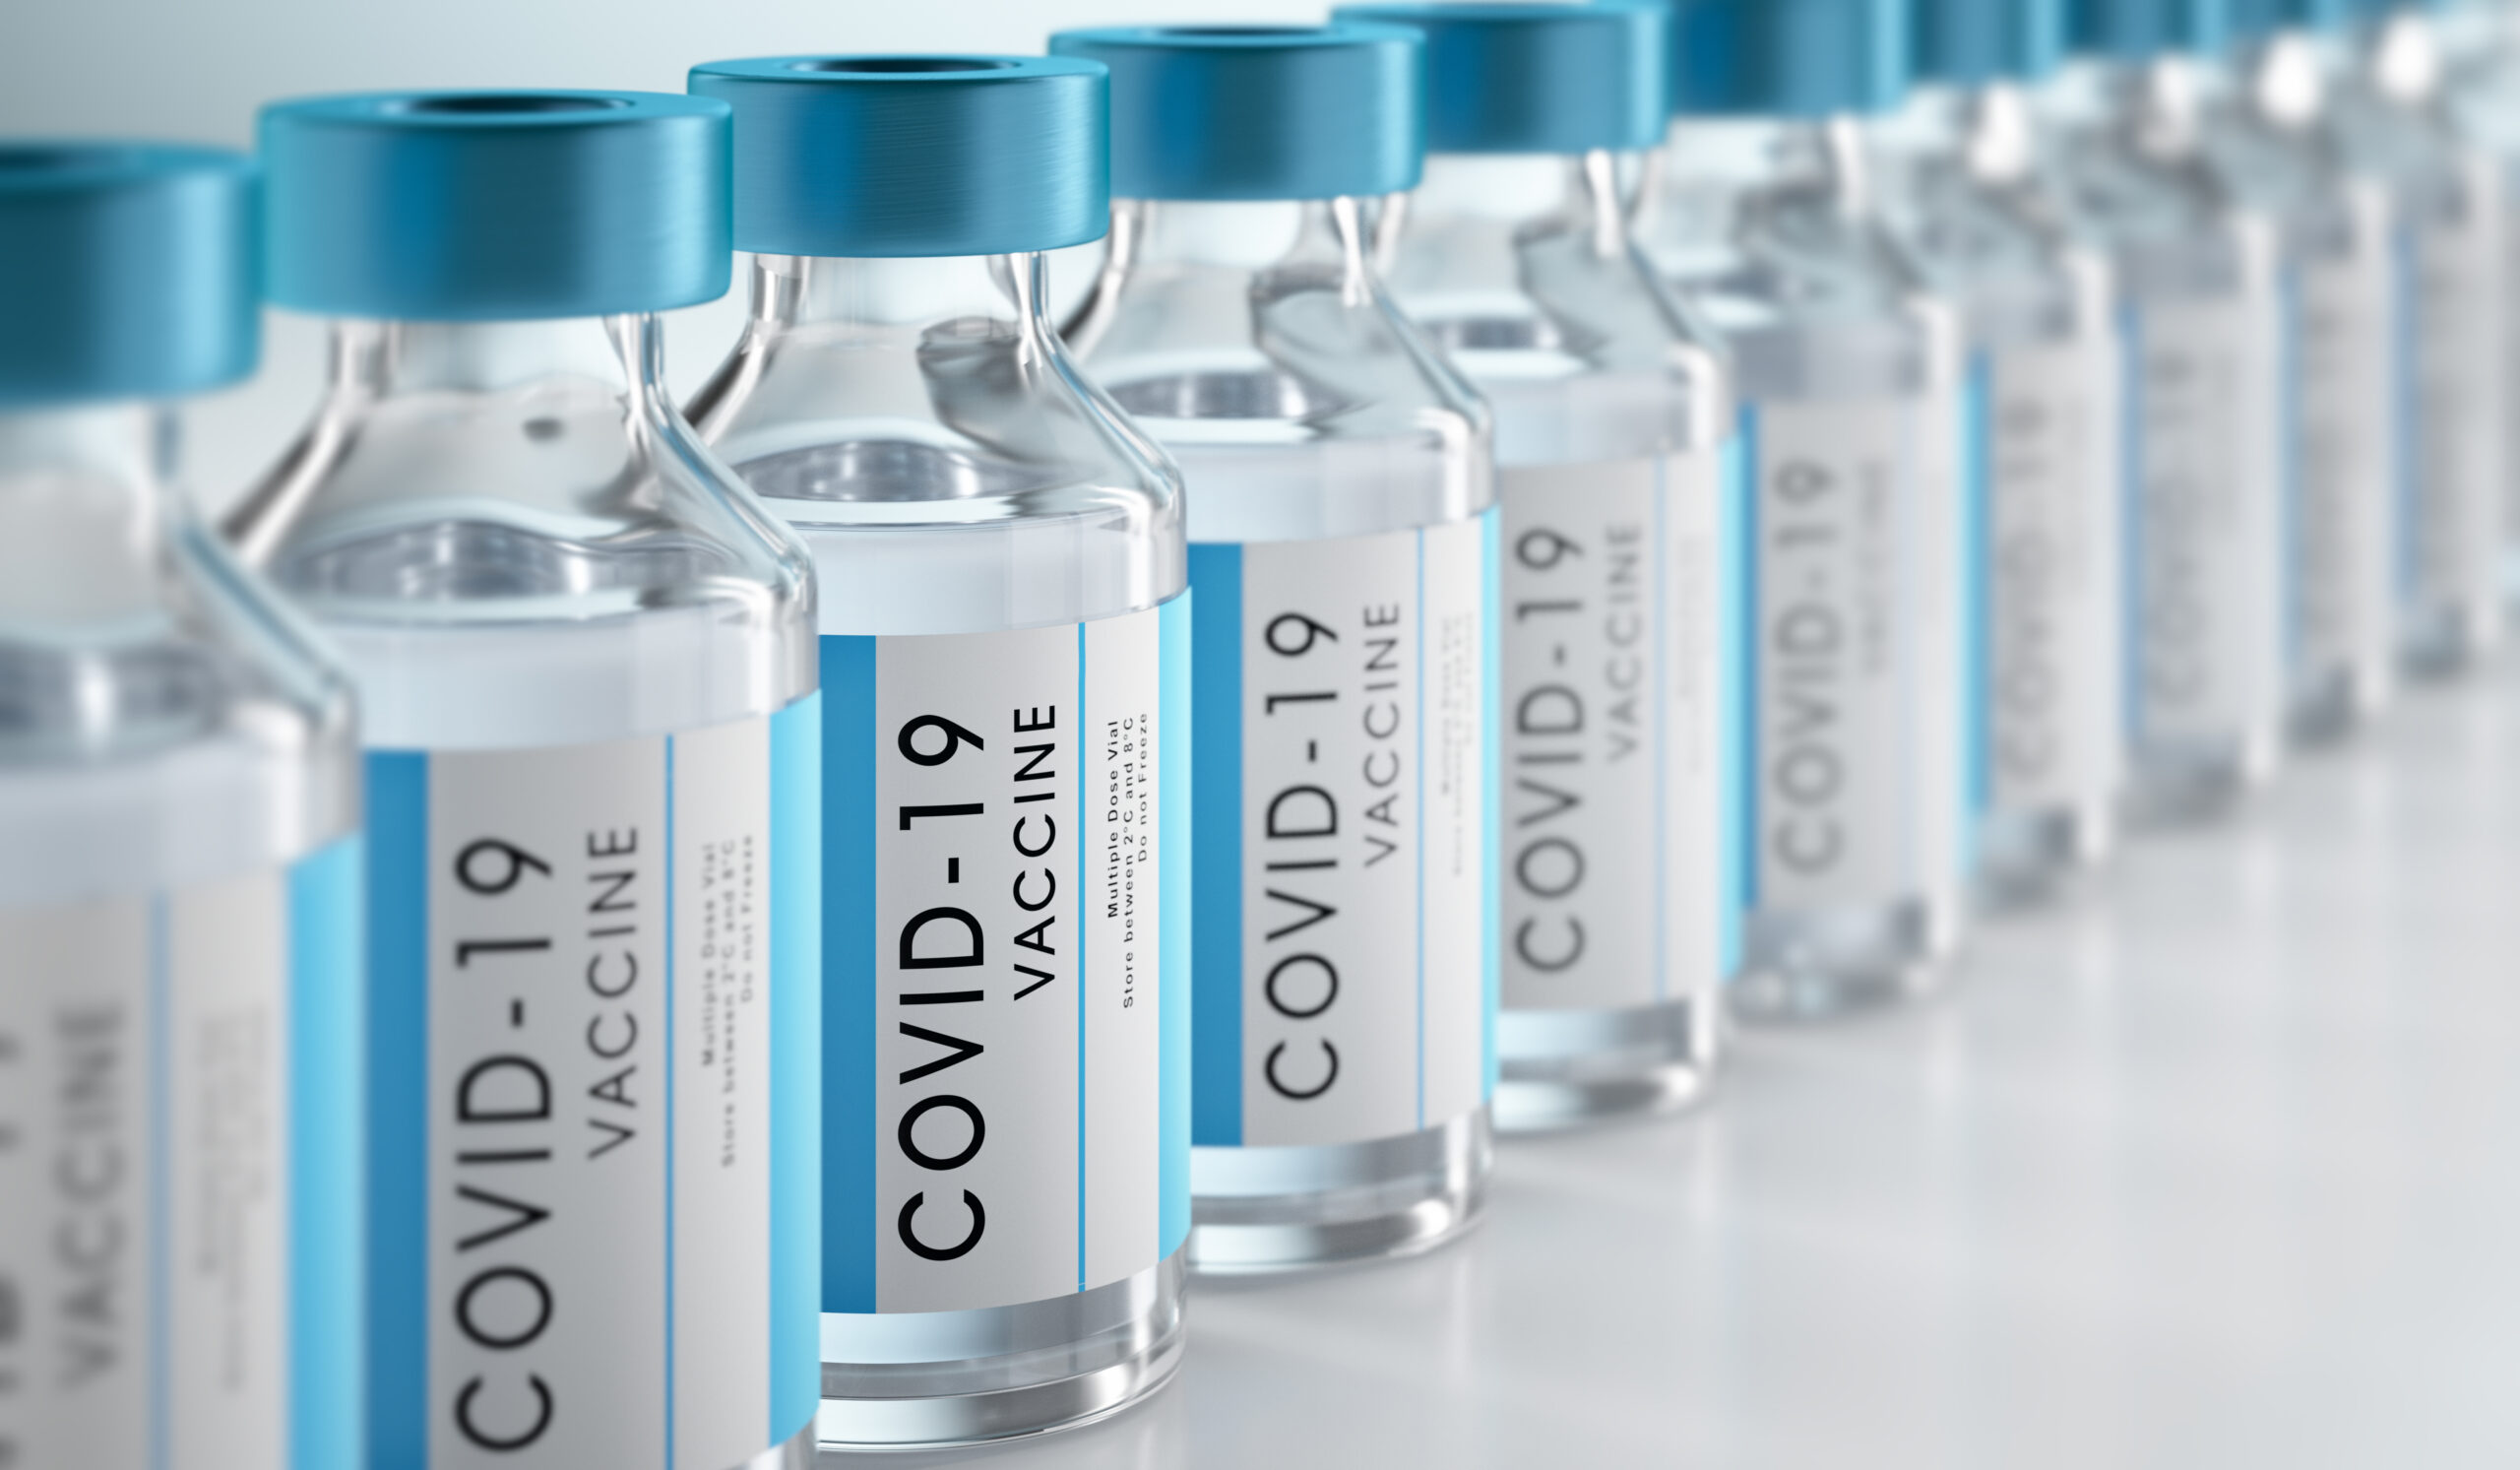 COVID booster numbers are low due to vaccine fatigue.